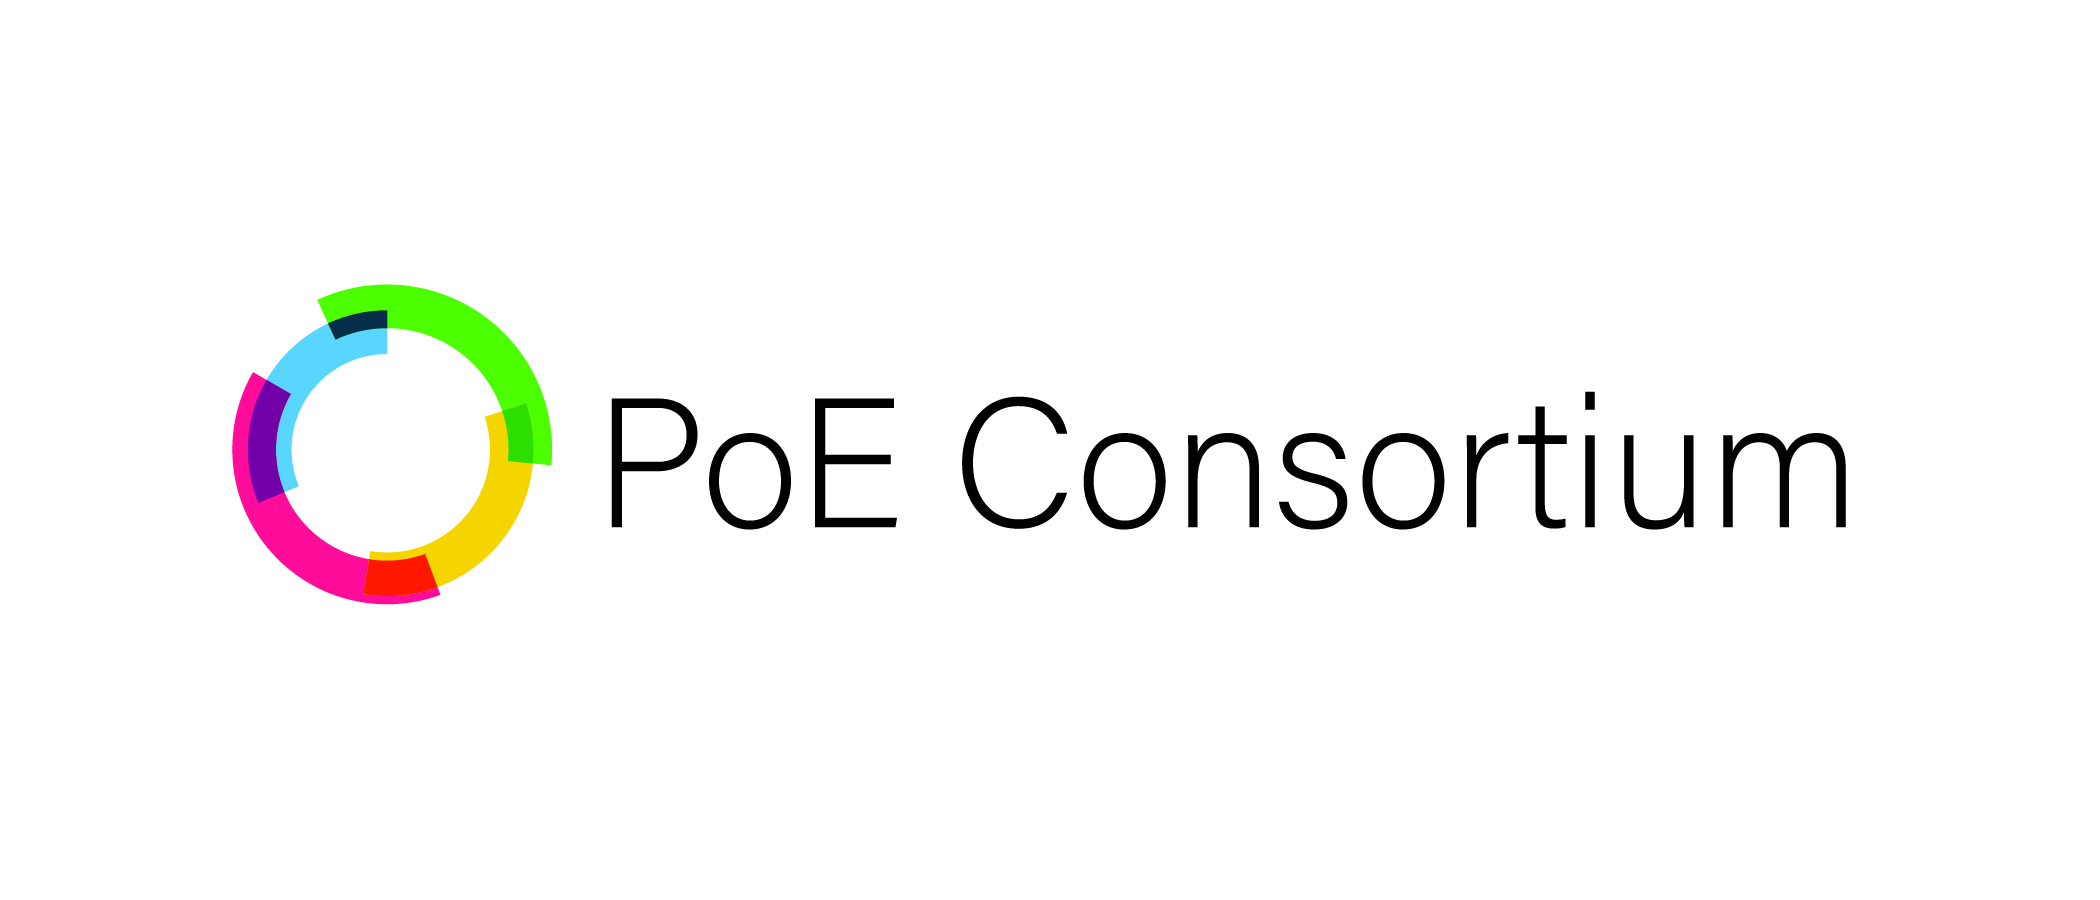 Seven firms come together to accelerate PoE lighting and technology adoption in buildings